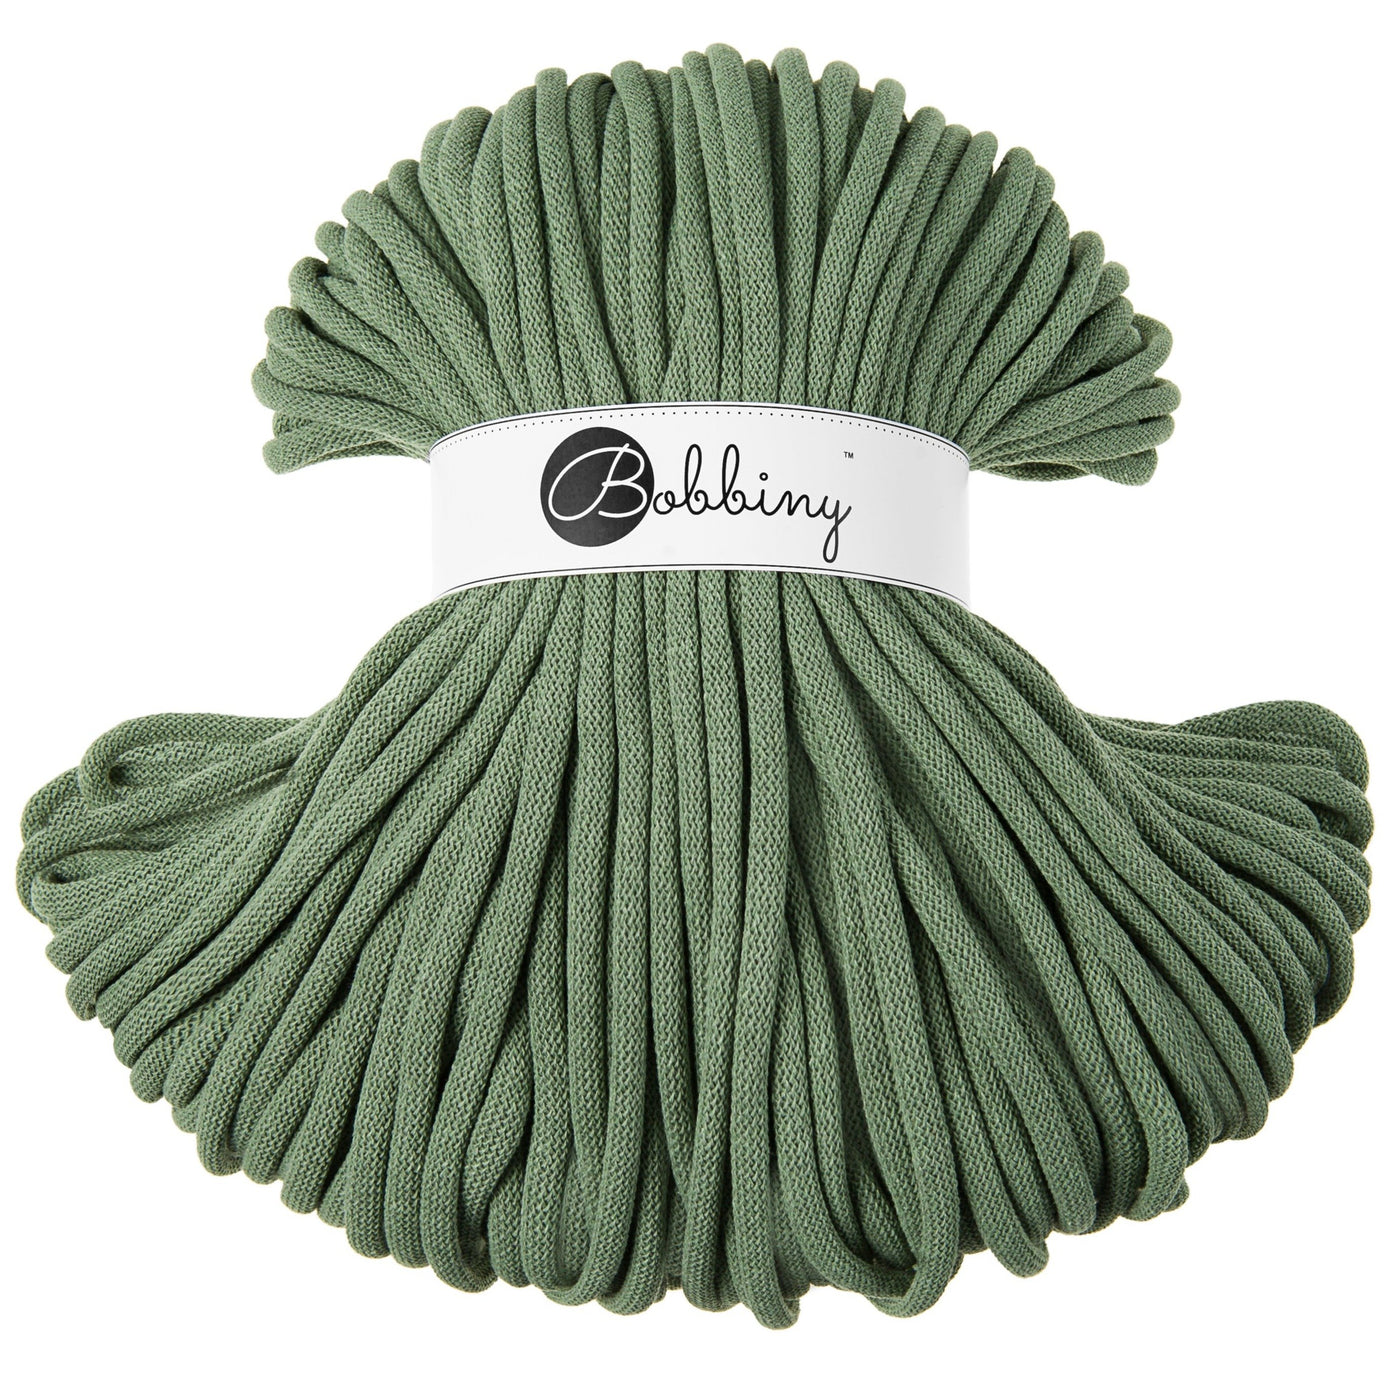 Where can I find Bobbiny Braided Cords Bobbiny Jumbo 9mm - 100m Eucalyptus? These gorgeous Bobbiny Ropes are made in Poland from 100% recycled cottons and are non toxic and certified safe for children. 9mm Diameter Length 100m Recommended for use with 14-16mm crochet hooks or knitting needles. Perfect for use with Macrame, Crochet or Knitting.